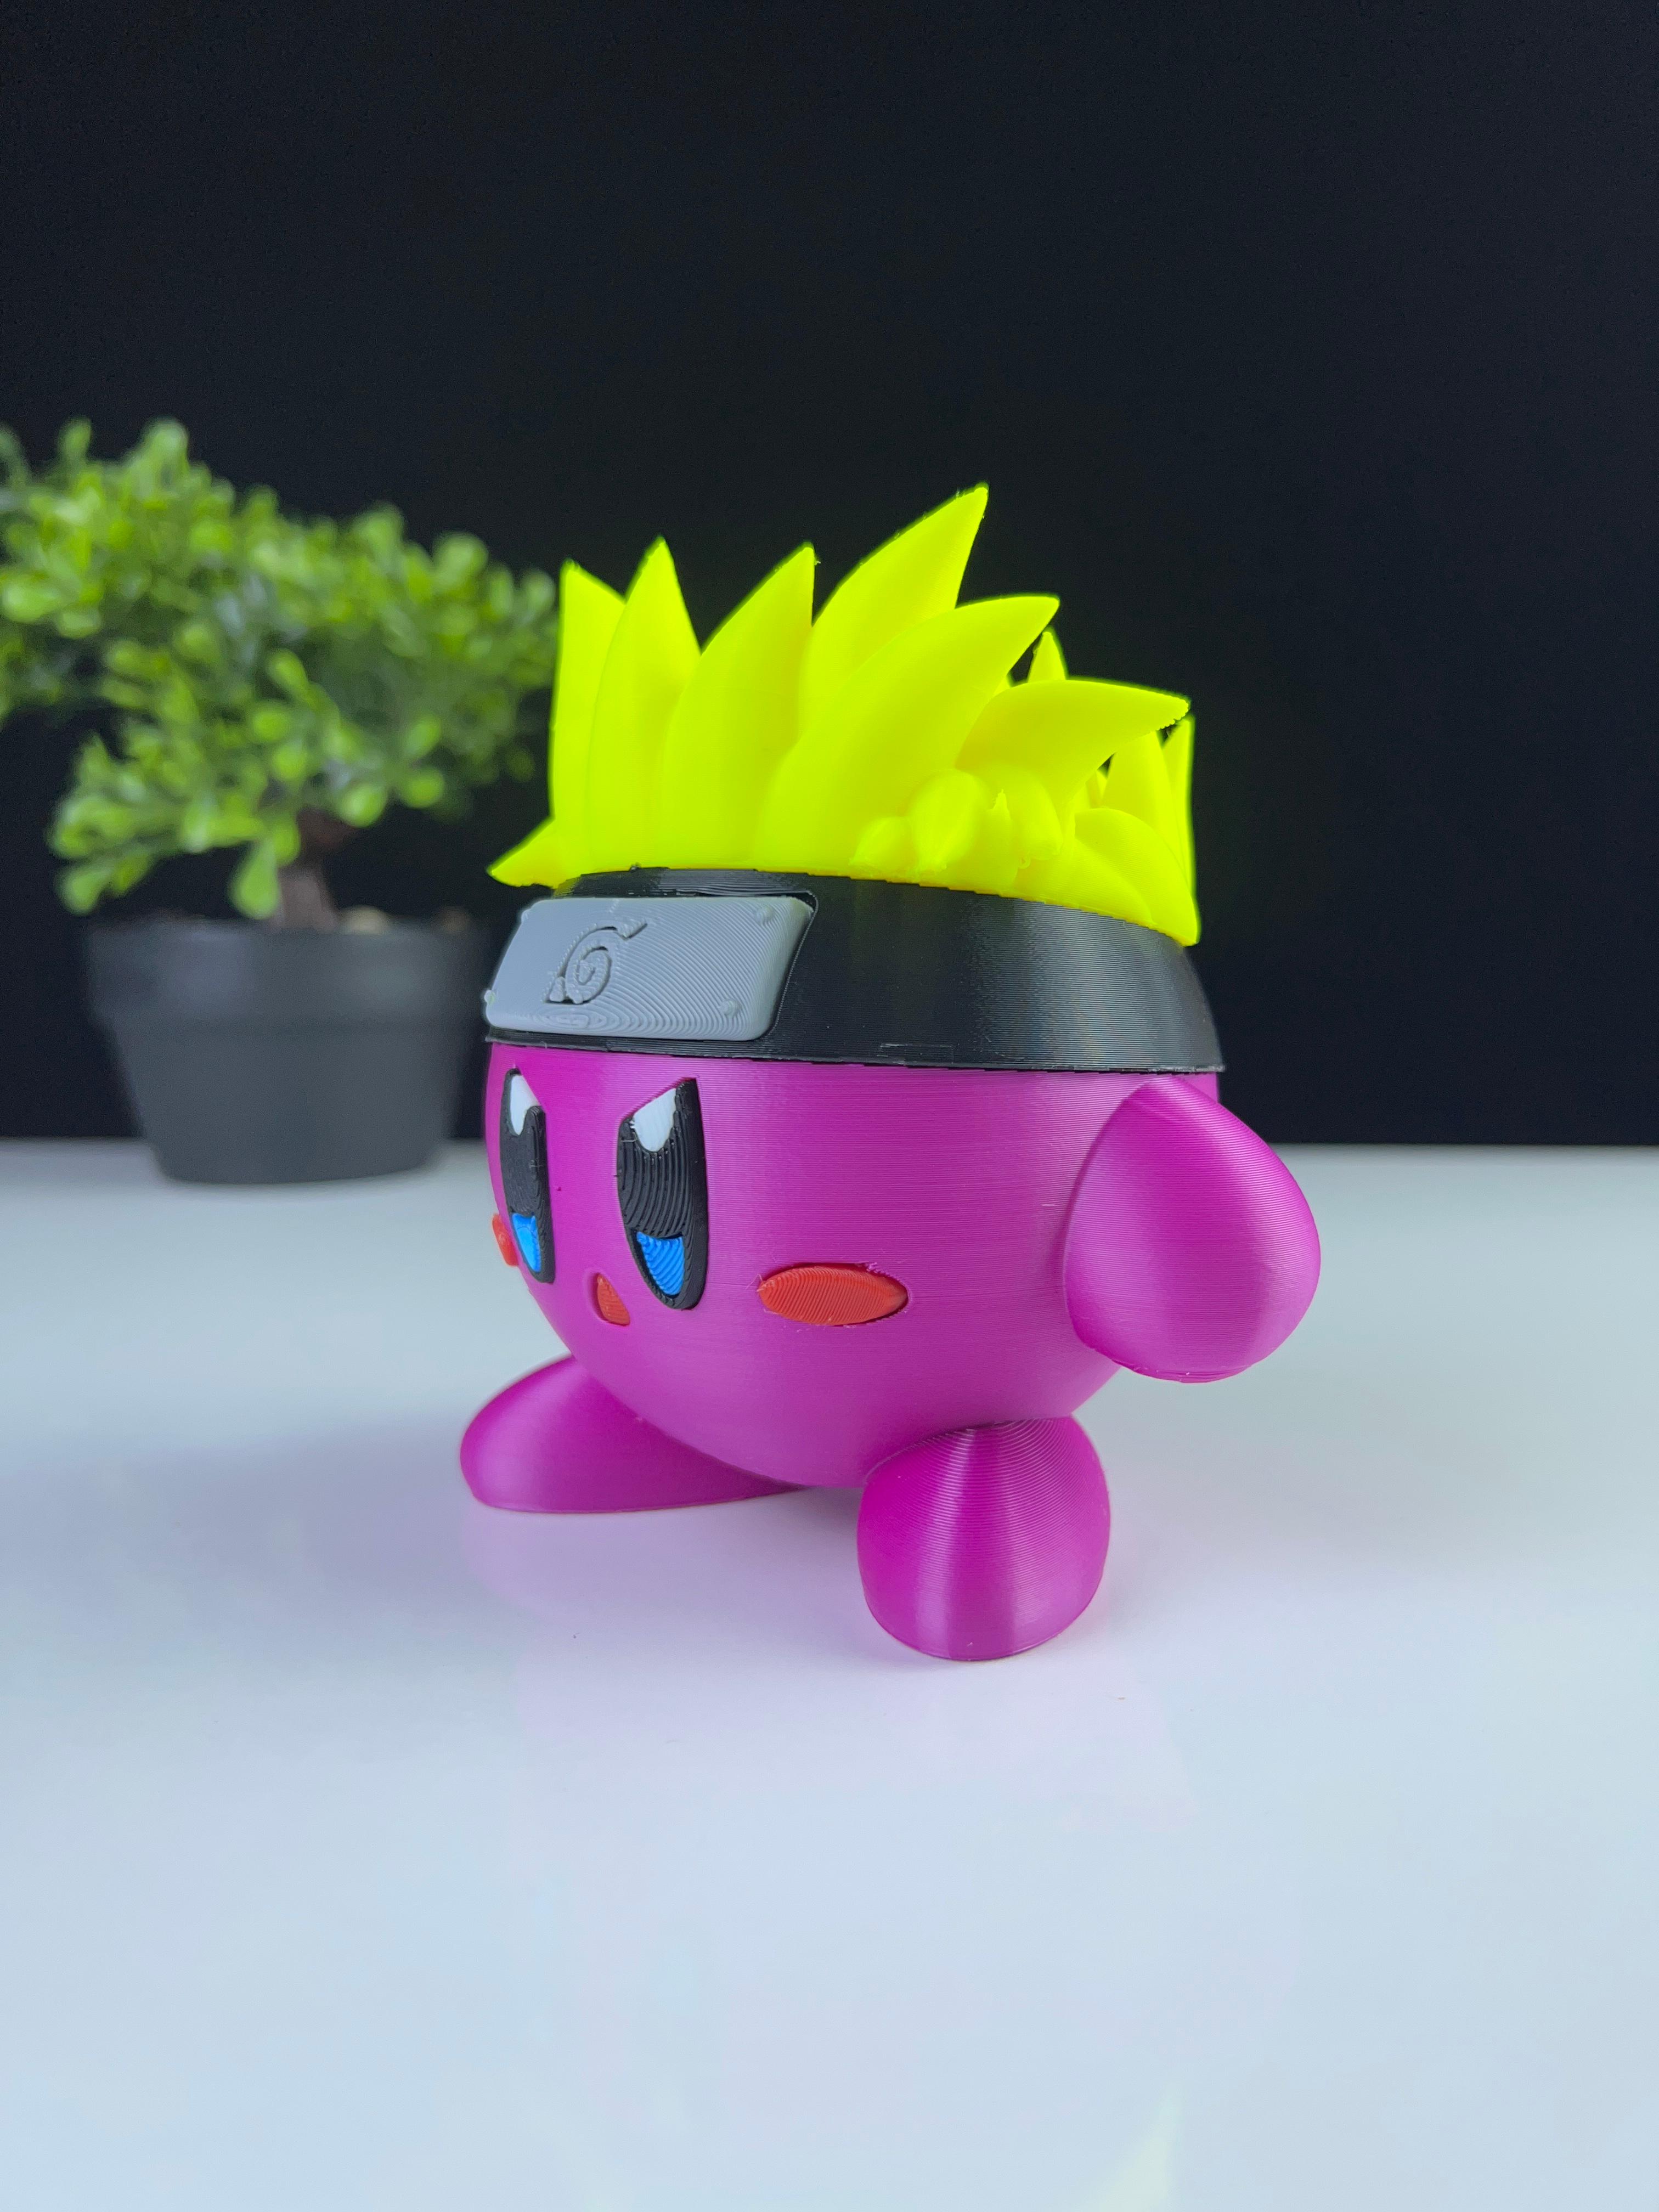 Naruto kirby - Multipart 3d model